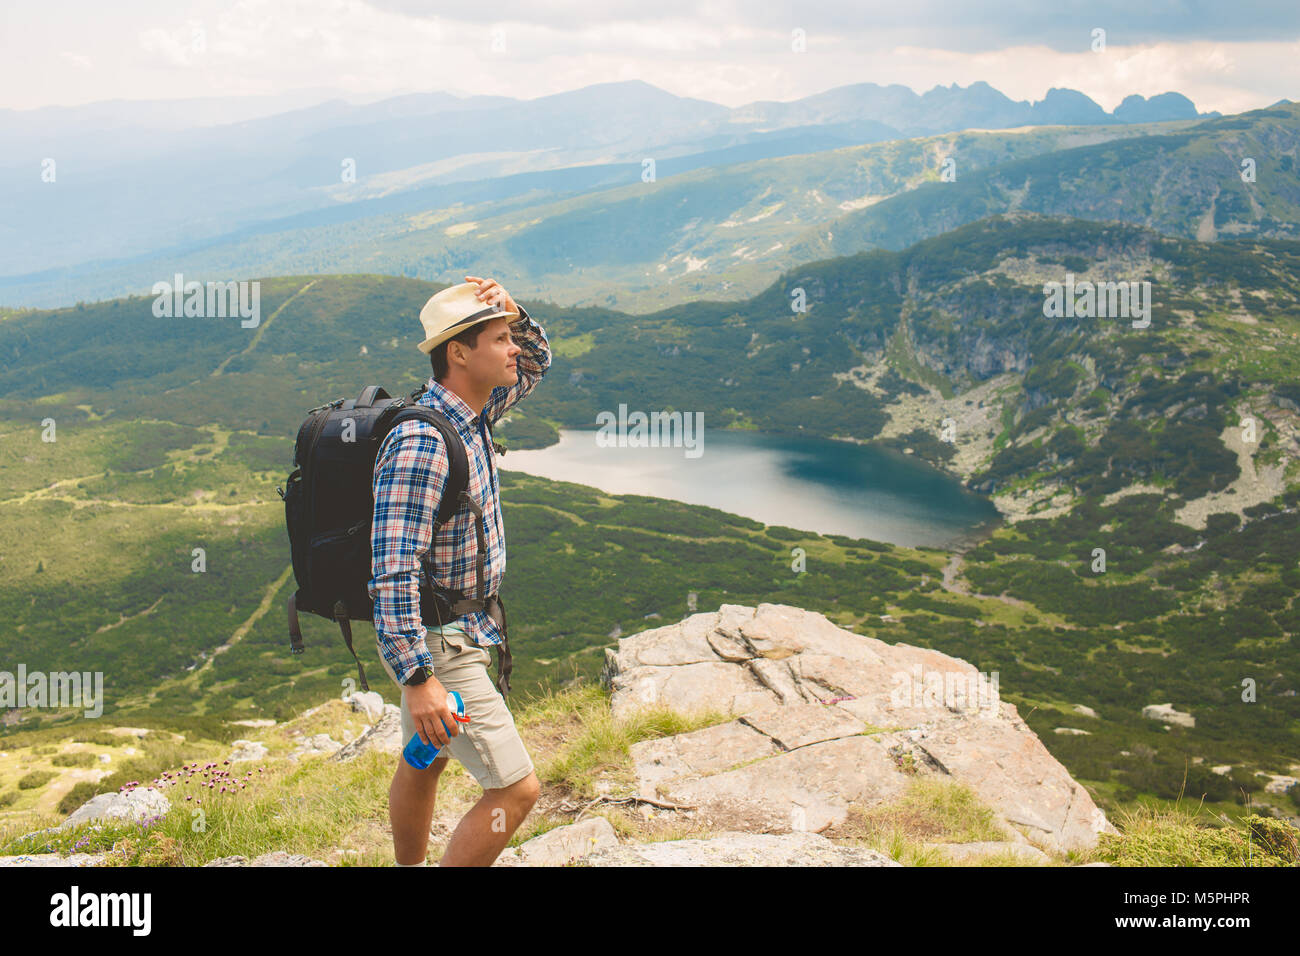 Traveler in the mountains Stock Photo